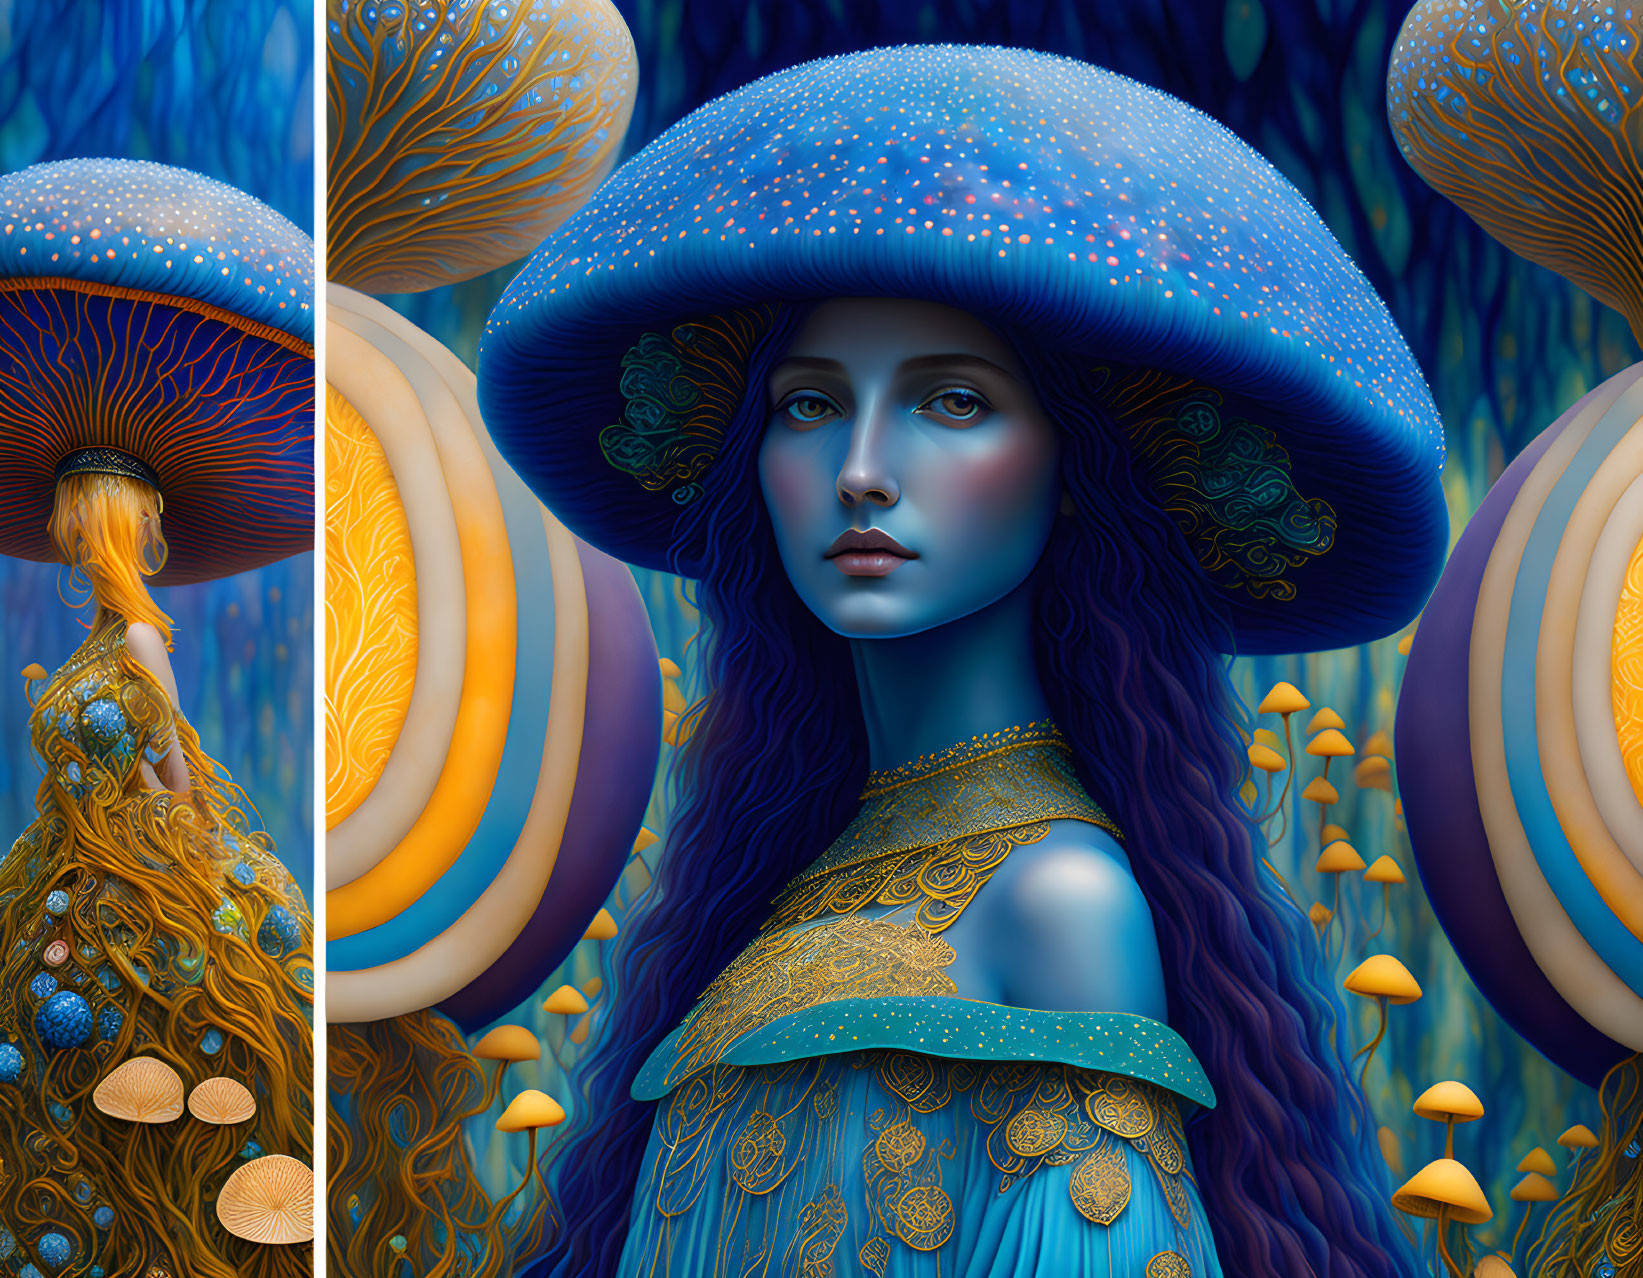 Surreal illustration of woman with blue skin in mystical forest